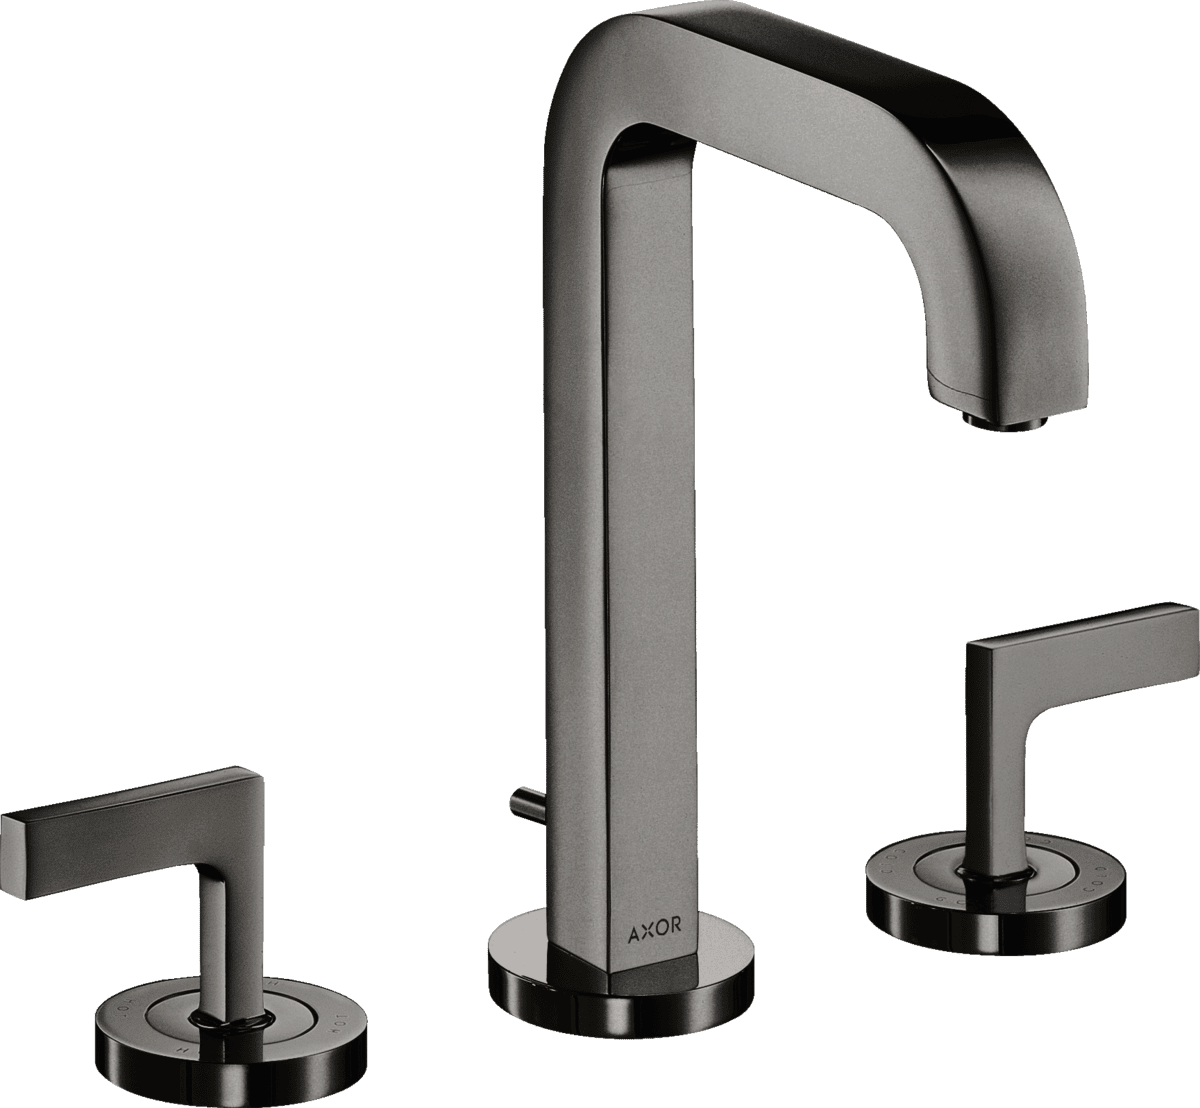 Picture of HANSGROHE AXOR Citterio 3-hole basin mixer 170 with spout 140 mm, lever handles, escutcheons and pop-up waste set #39135330 - Polished Black Chrome